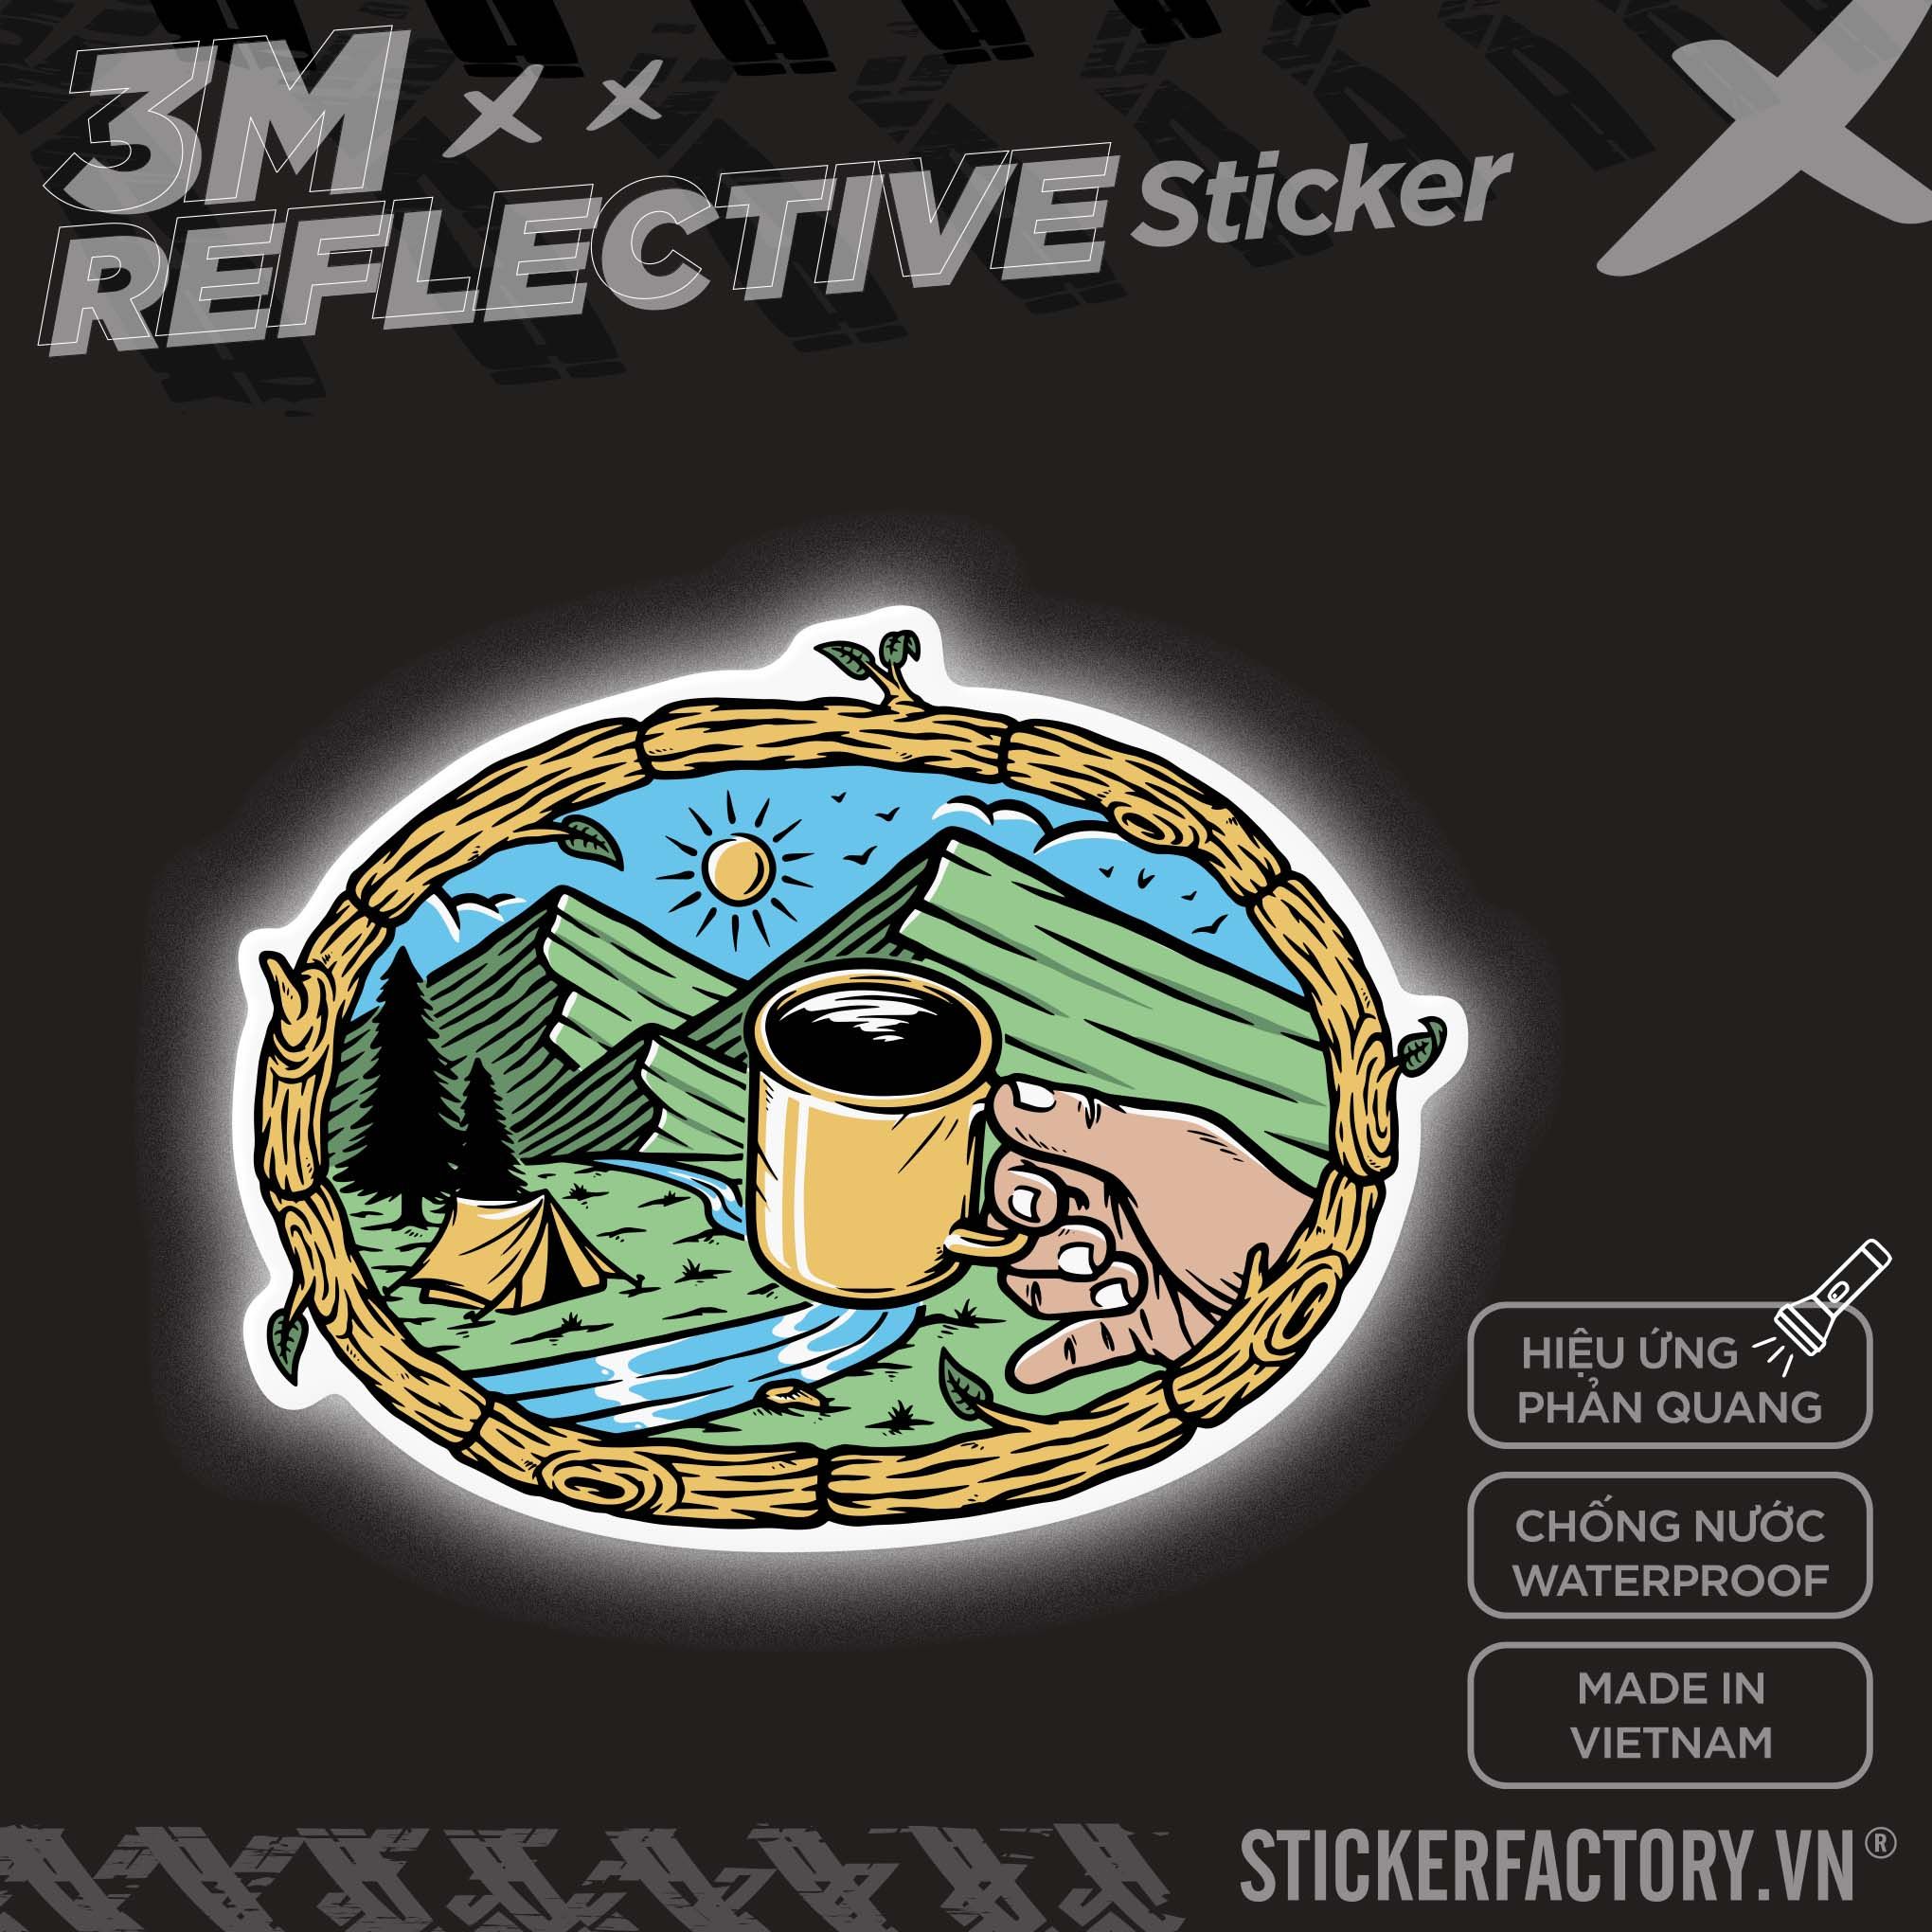 ENJOYING COFFEE IN THE MOUNTAINS 3M - Reflective Sticker Die-cut